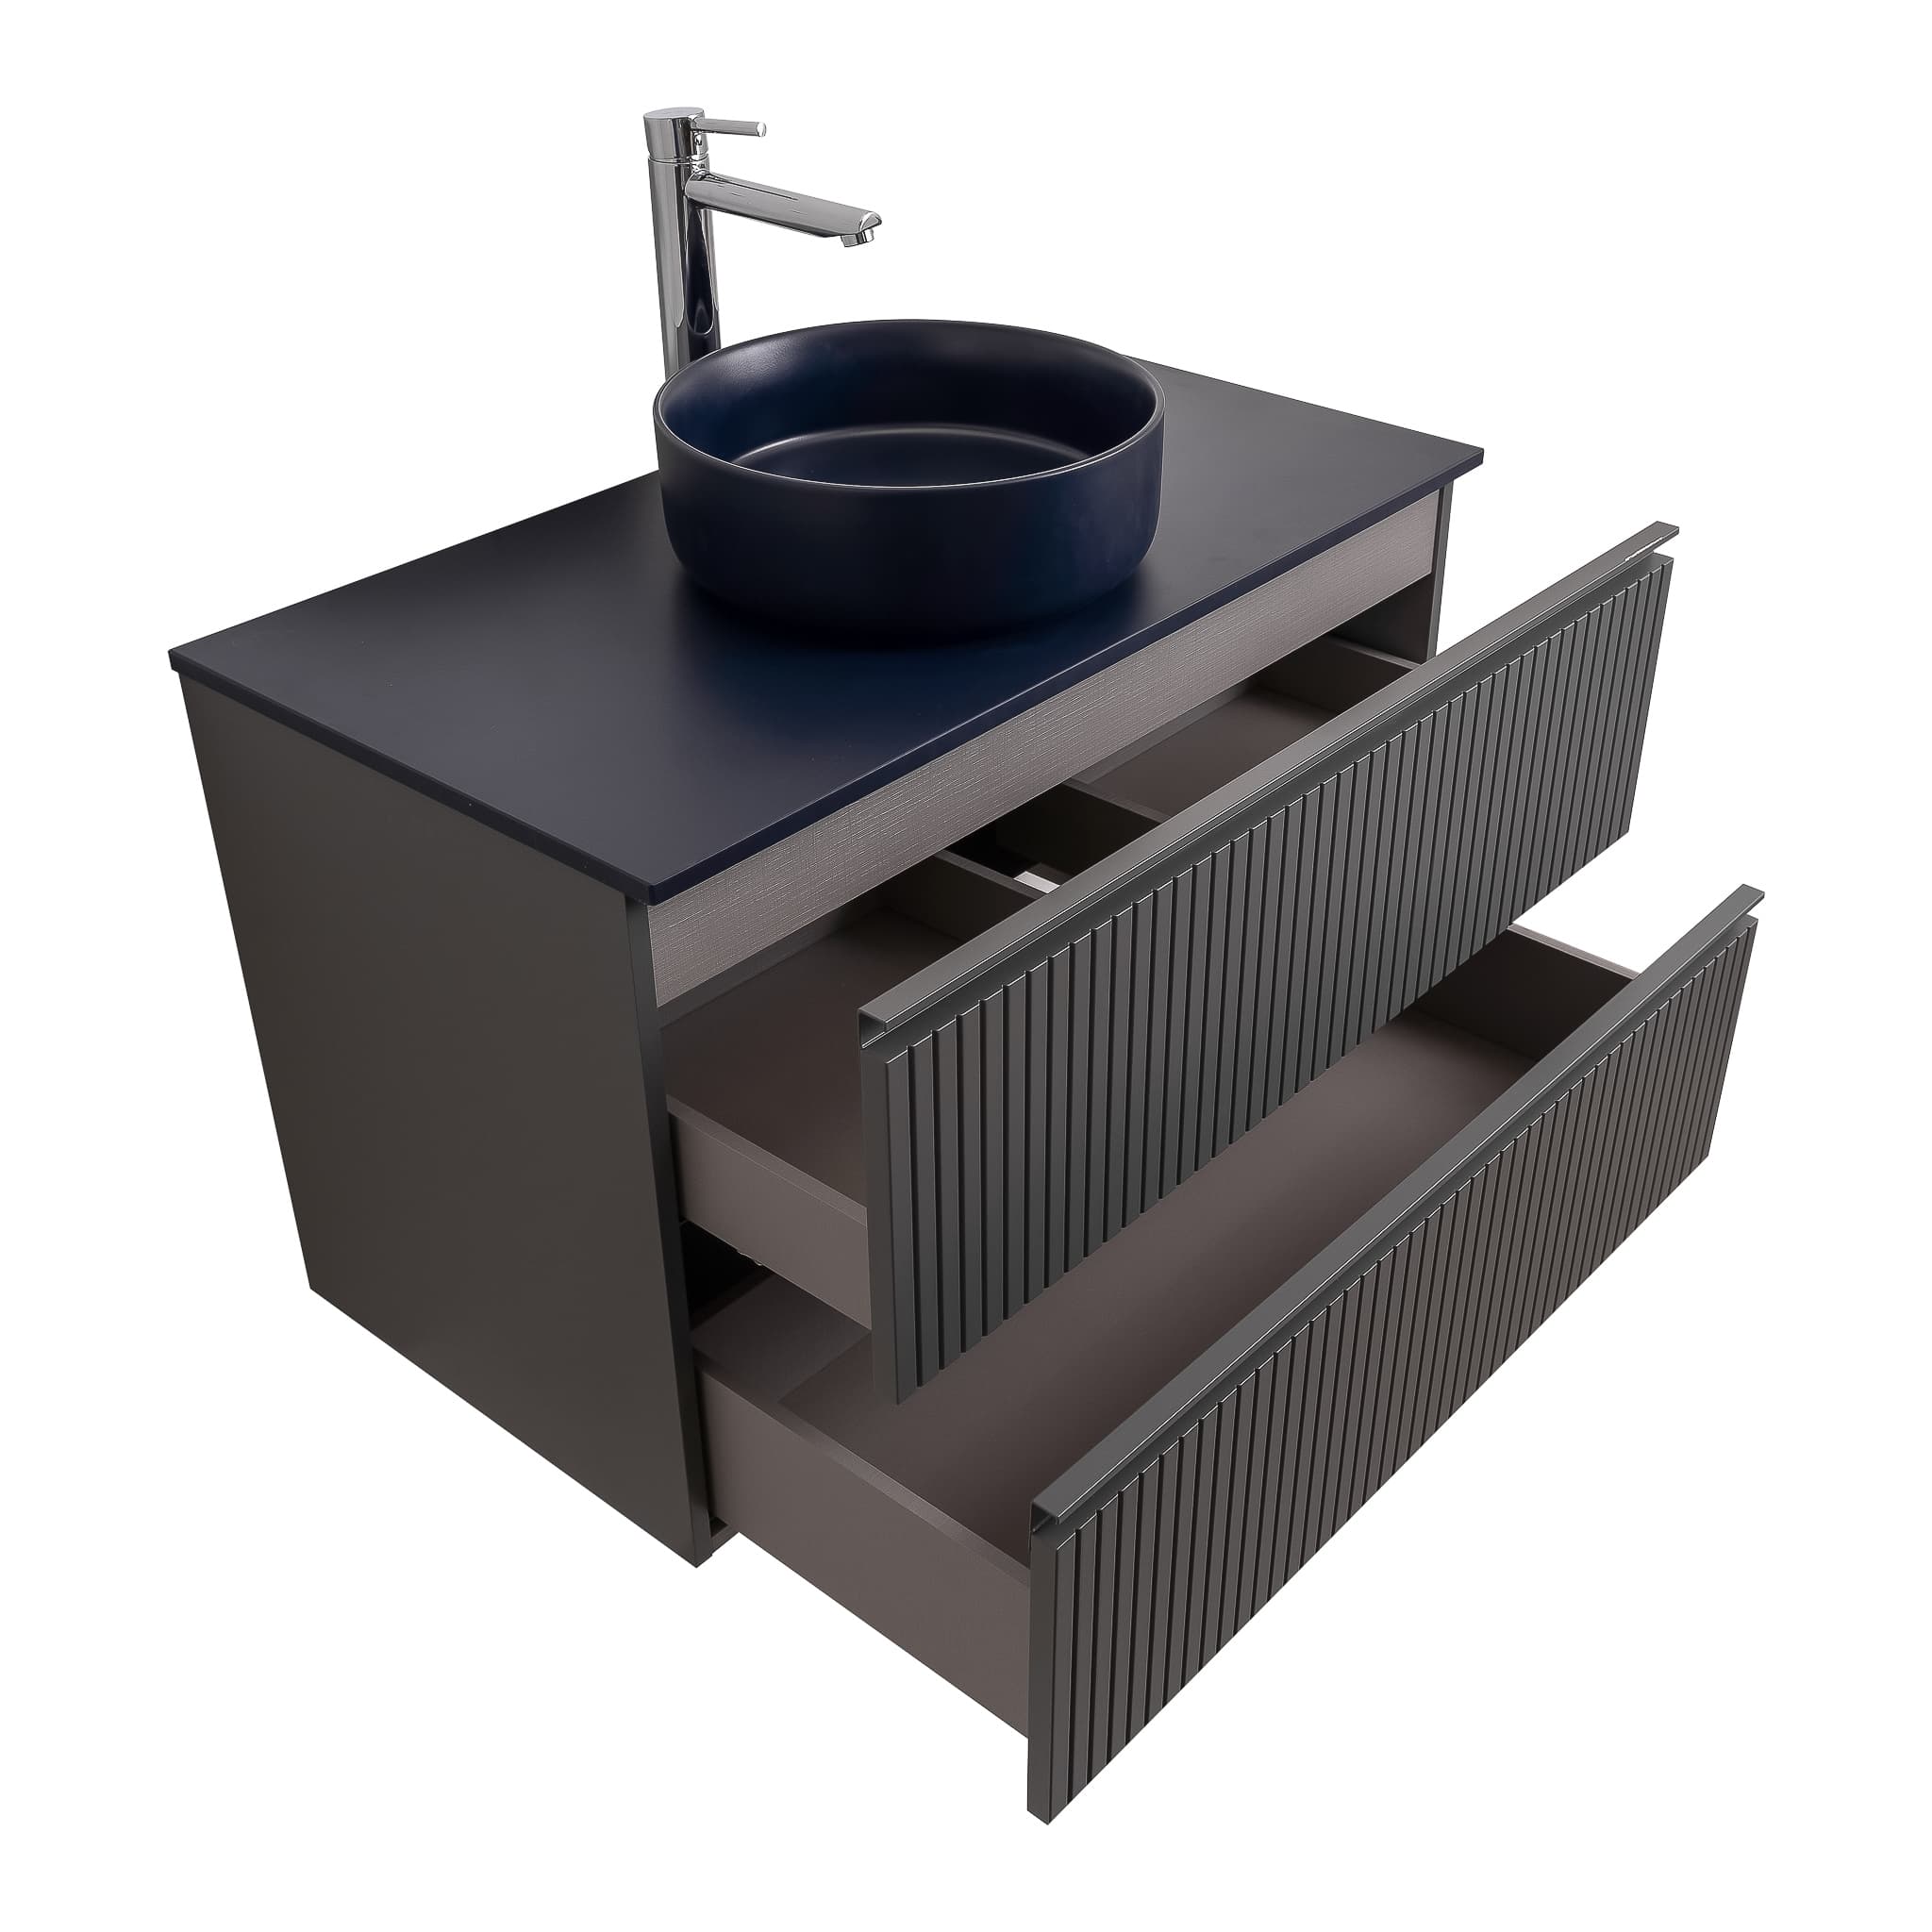 Ares 39.5 Matte Grey Cabinet, Ares Navy Blue Top And Ares Navy Blue Ceramic Basin, Wall Mounted Modern Vanity Set